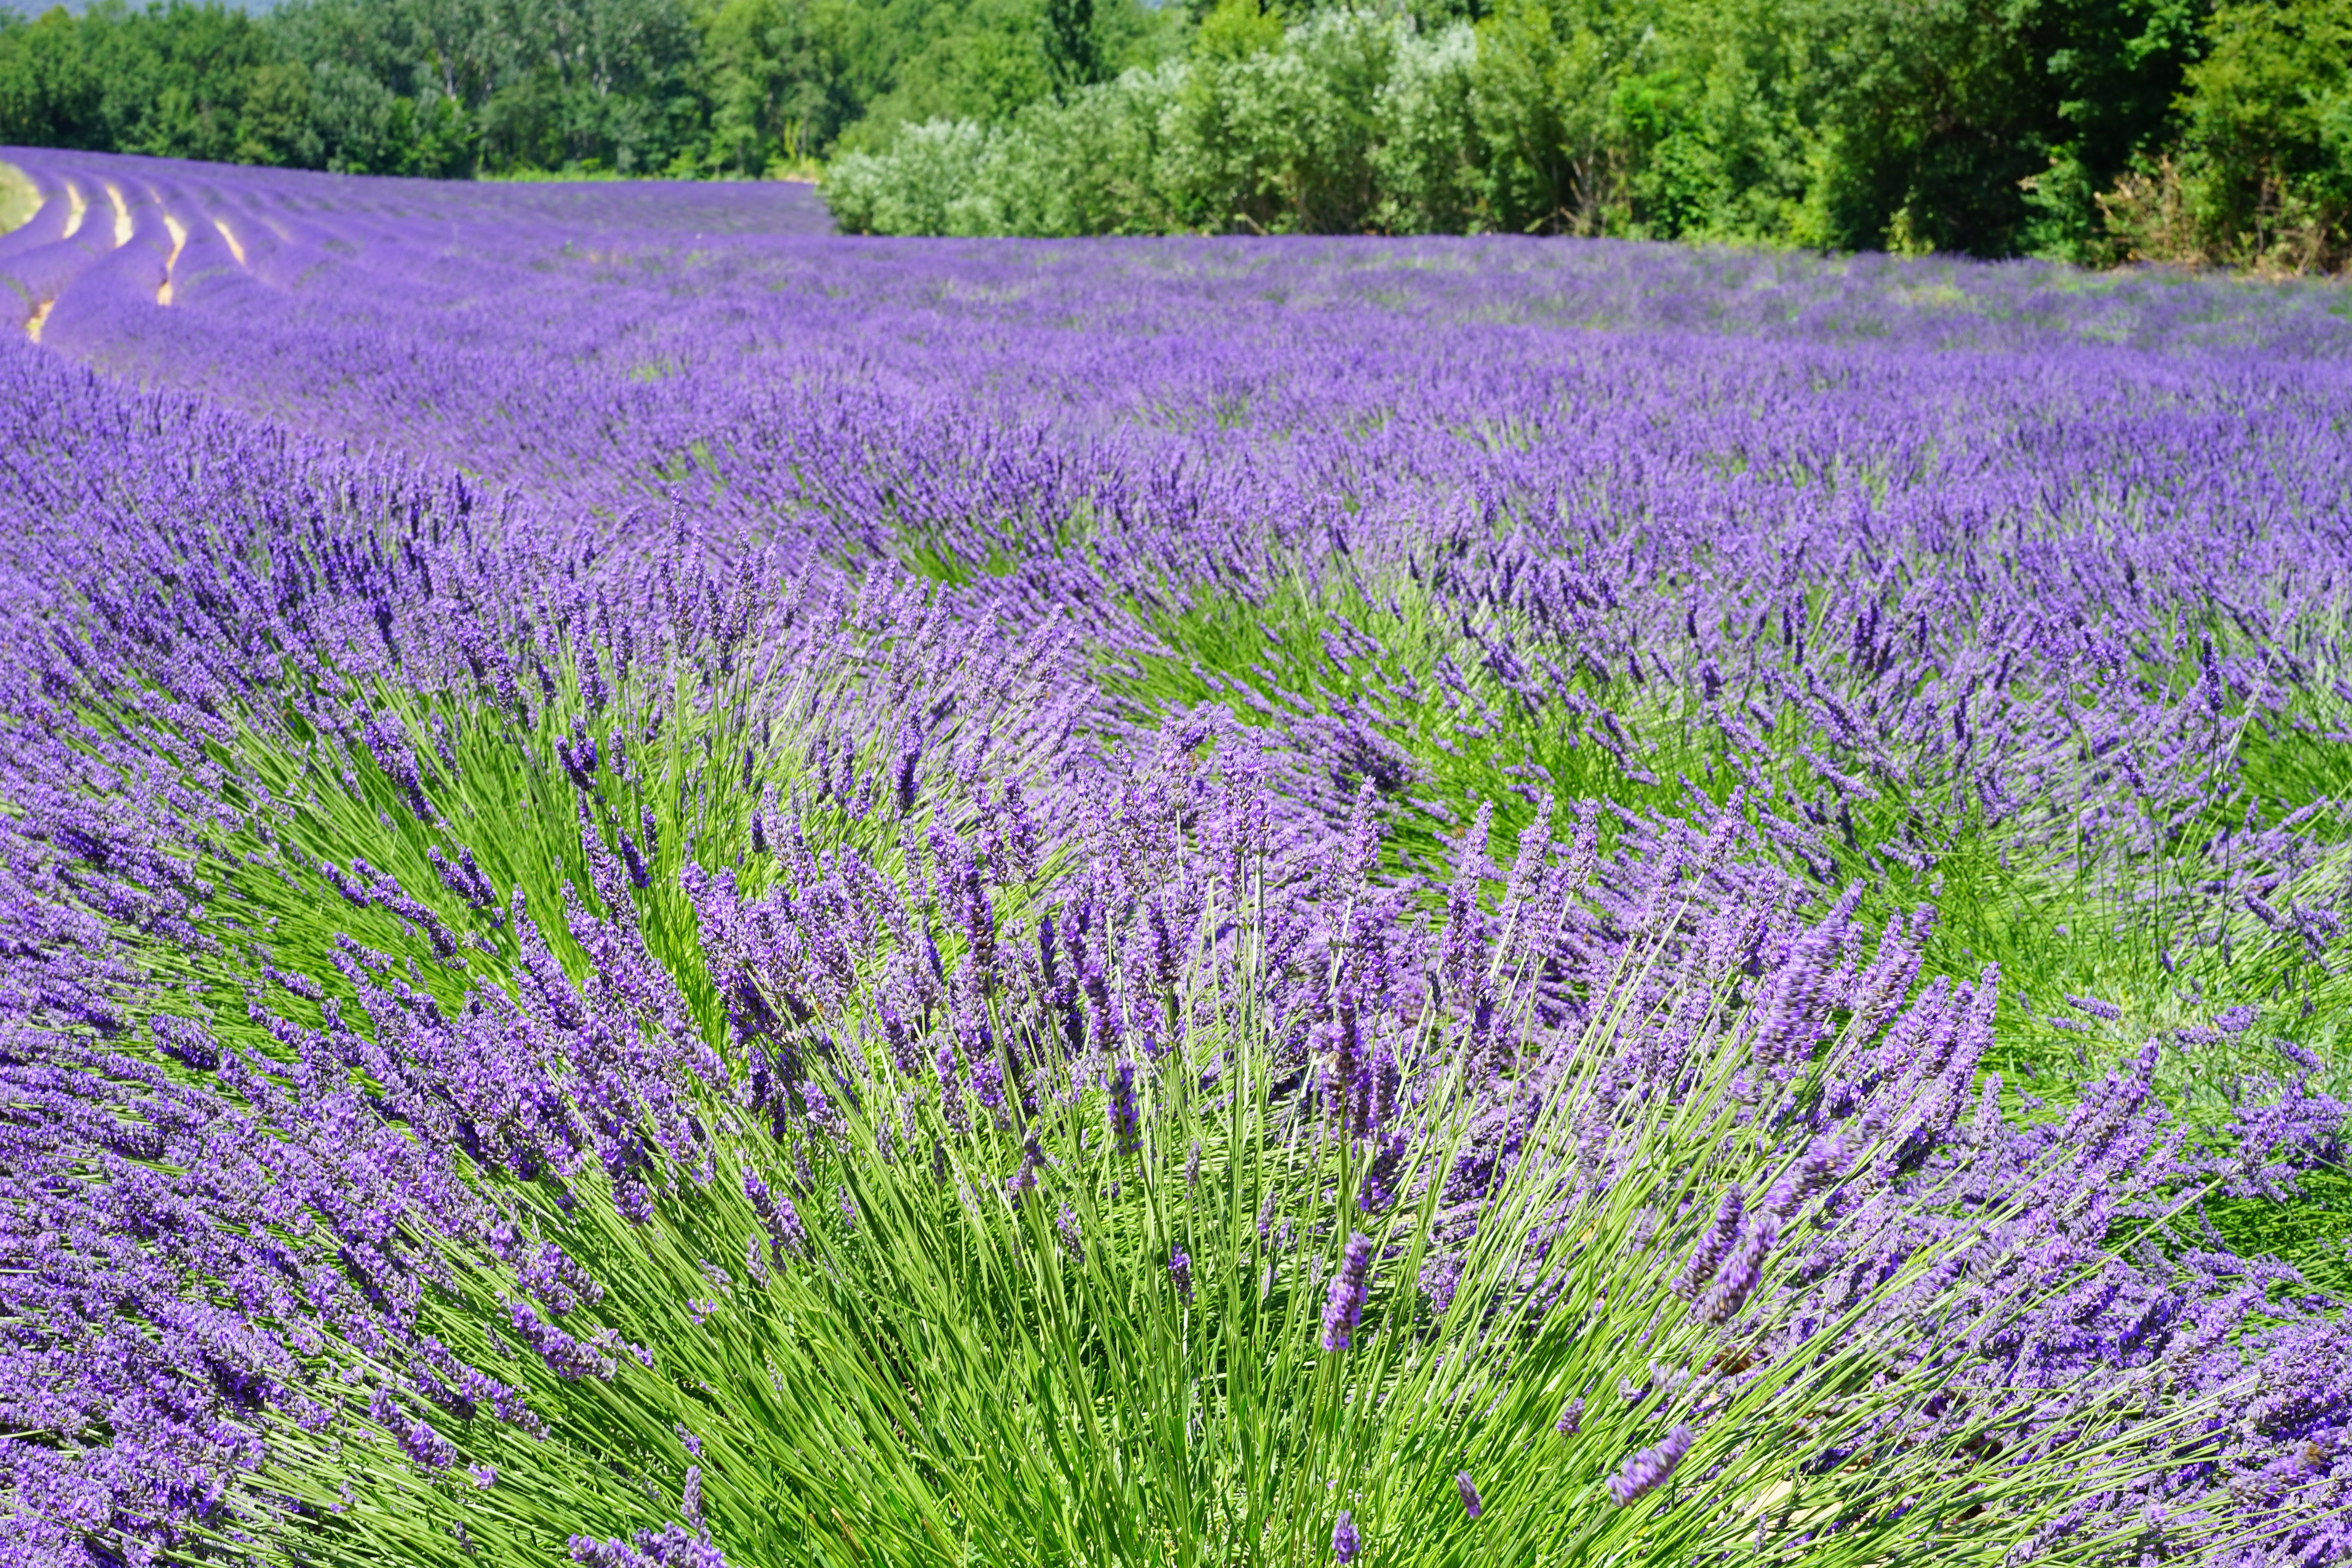 Free photo A field near the forest with purple lavender flowers